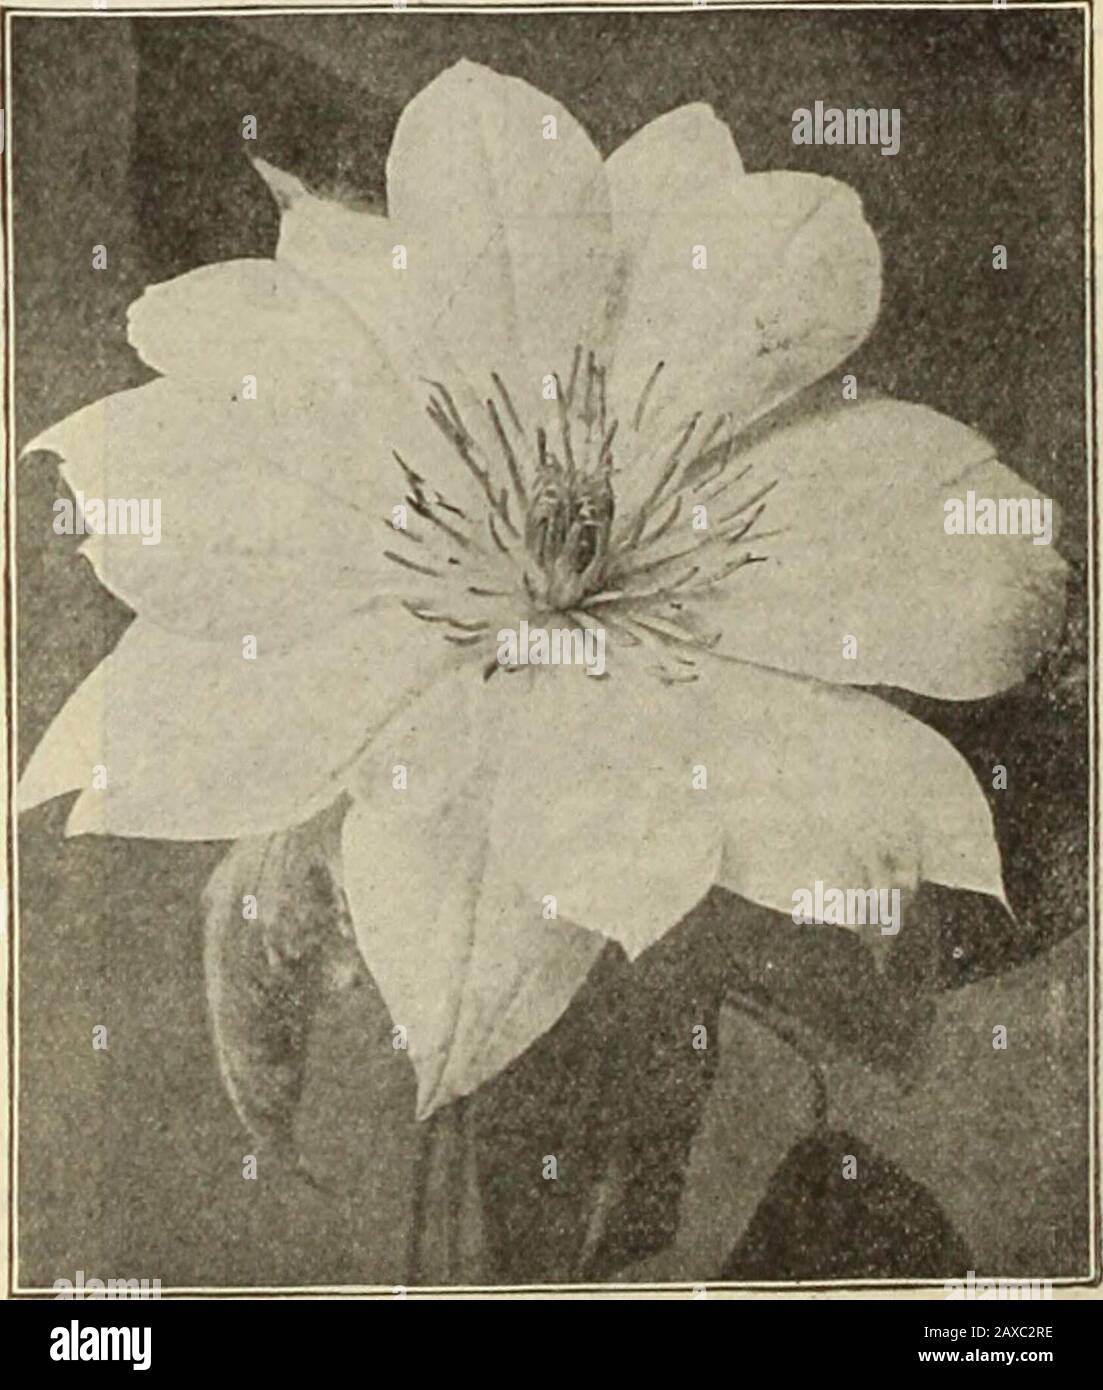 Dreer's garden book : seventy-fourth annual edition 1912 . ly places, stumps, rock-work, or wherevera showy-flowering vine is desired, the Bignonias will be foundvery useful. The flowers are large, attractive and borne pro-fusely when the plants attain a fair size. Qrandiflora. Large flowers of orange-red. 50 cts. each; $5.00 per doz.Radicans. Dark red, orange throat, free blooming and very hardy. 25 cts. each; $2.50 per doz. E^NEW YELEOl^V TRUMPET YI]NE, BIGNOISIA HUNTERI. A strong growing, very free-flowering variety with largechrome yellow flowers, entirely distinct and a valuable additiont Stock Photo